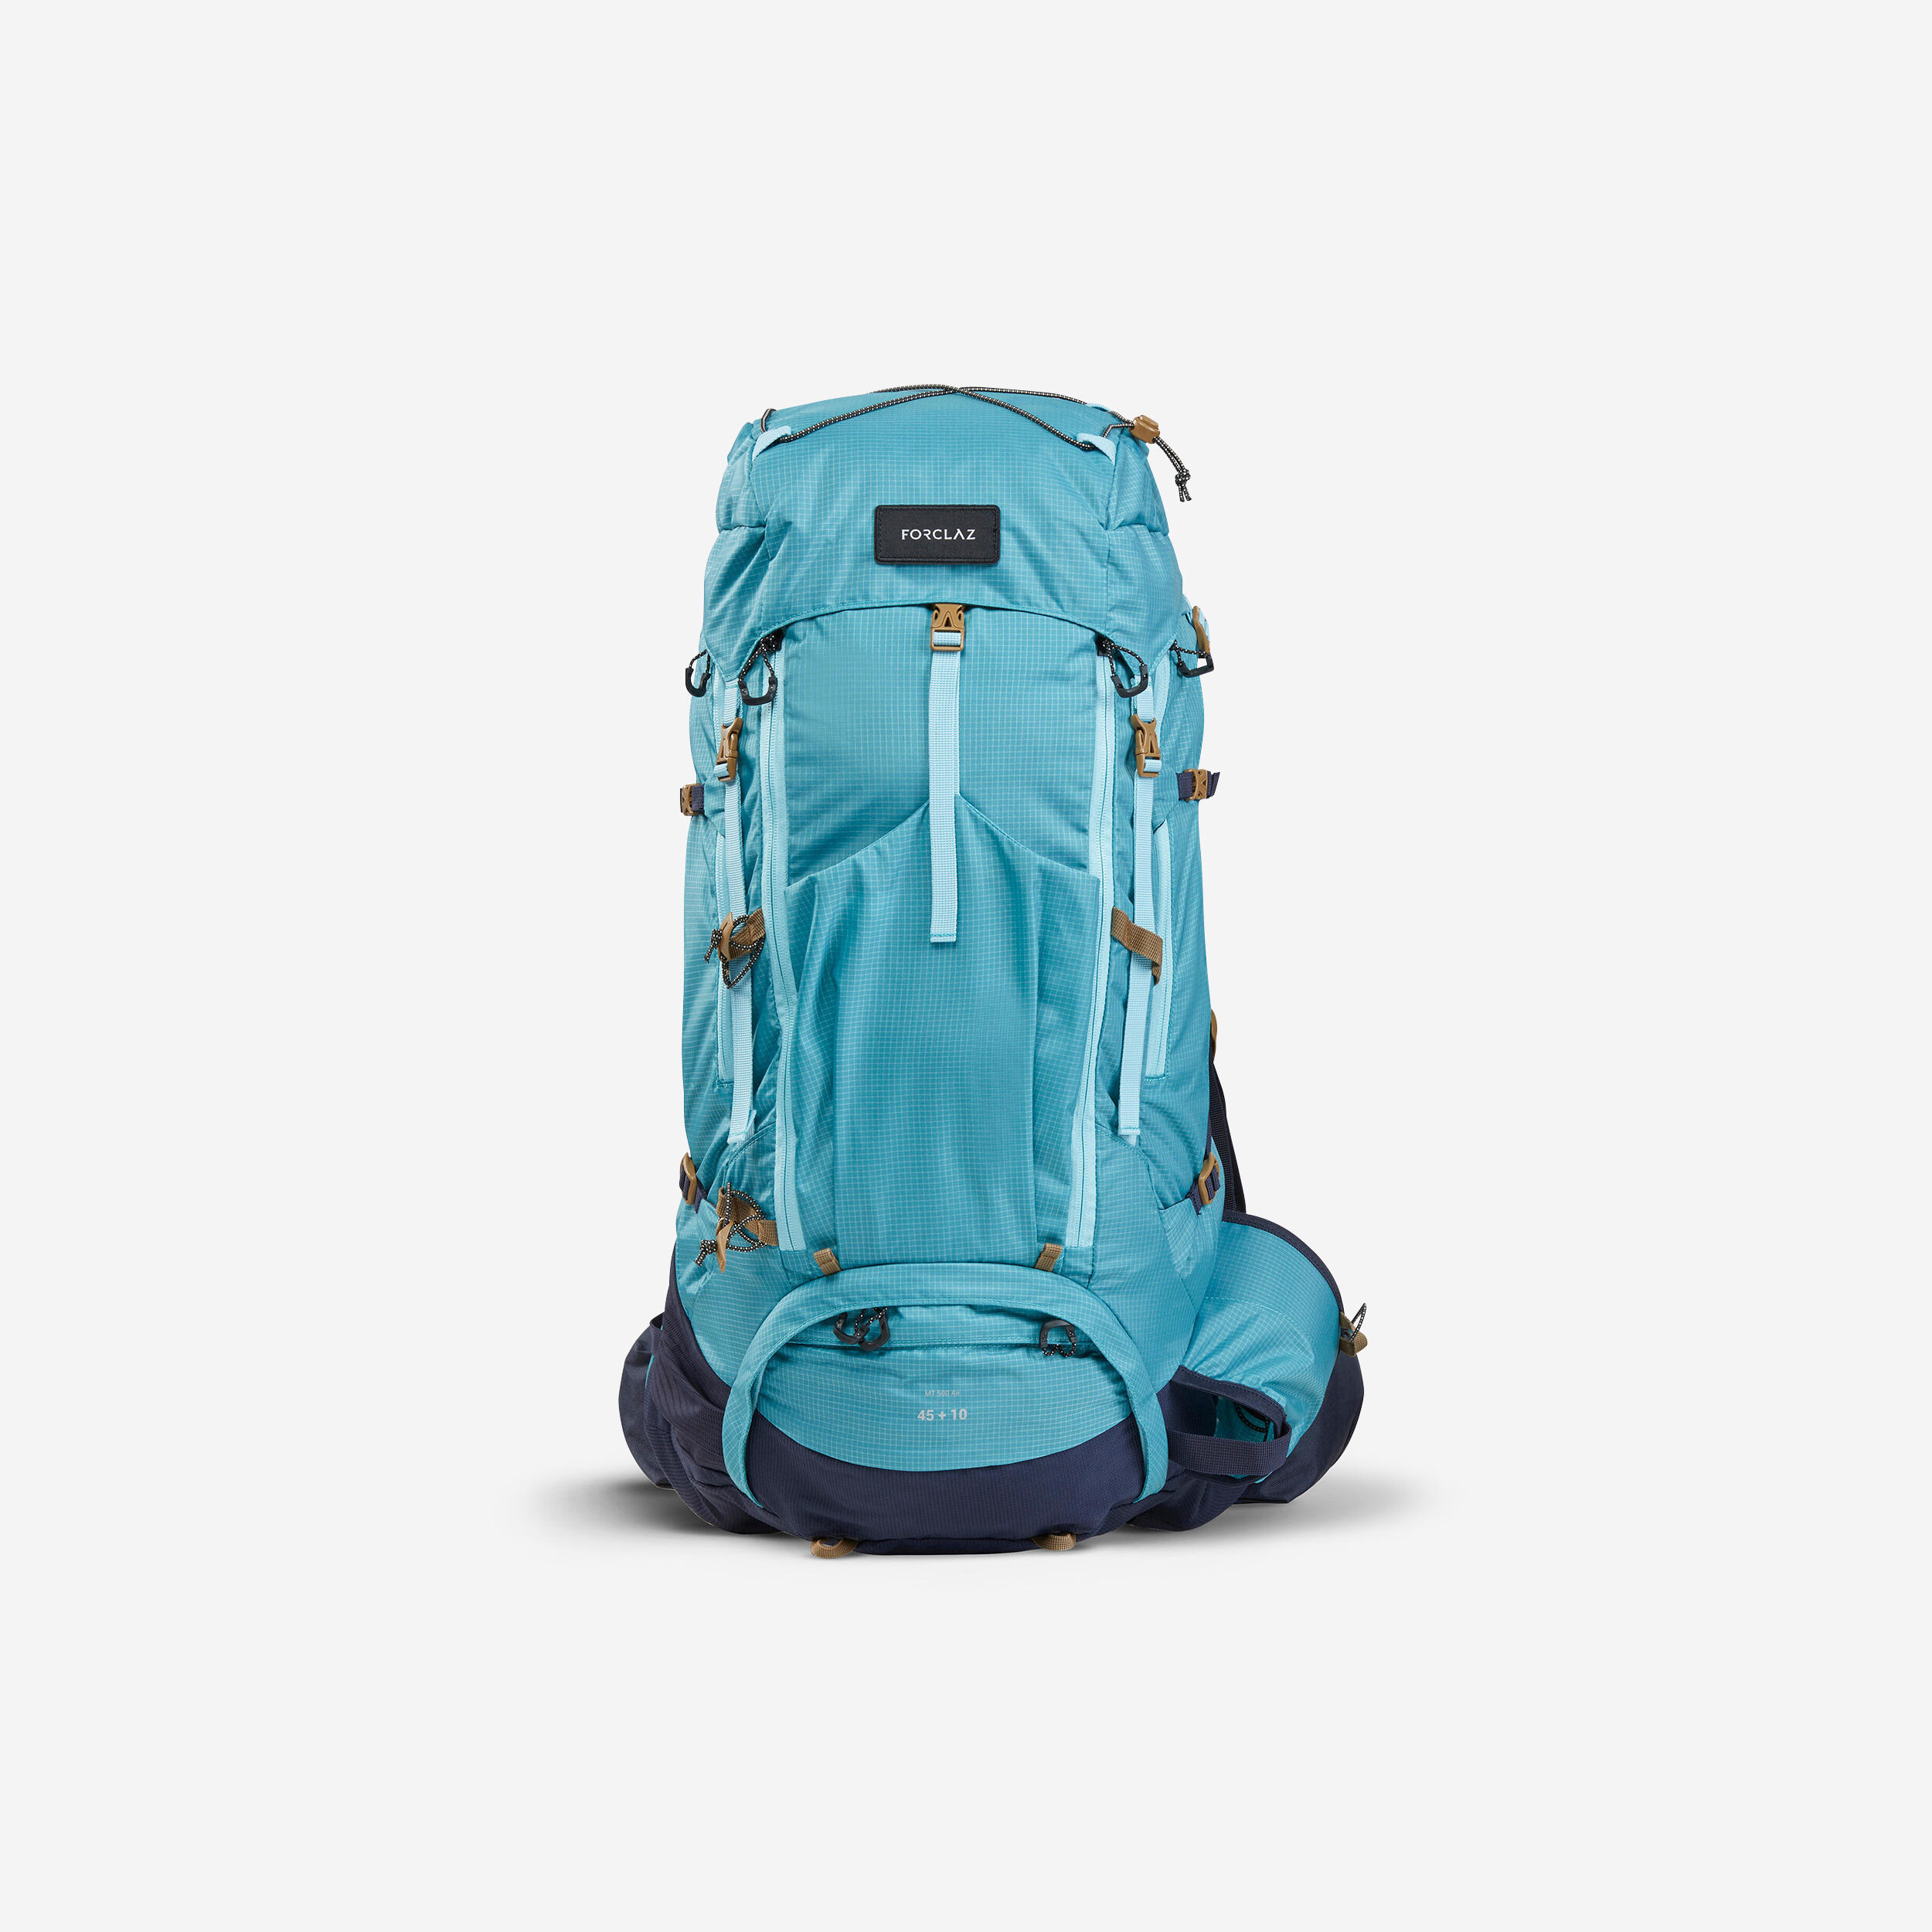 RUCKSACK WATERPROOF TREKKING BAG HIKKING BACKPACK FOR TRAVEL & OUTDOOR  Rucksack - 60 L Price in India, Full Specifications & Offers | DTashion.com